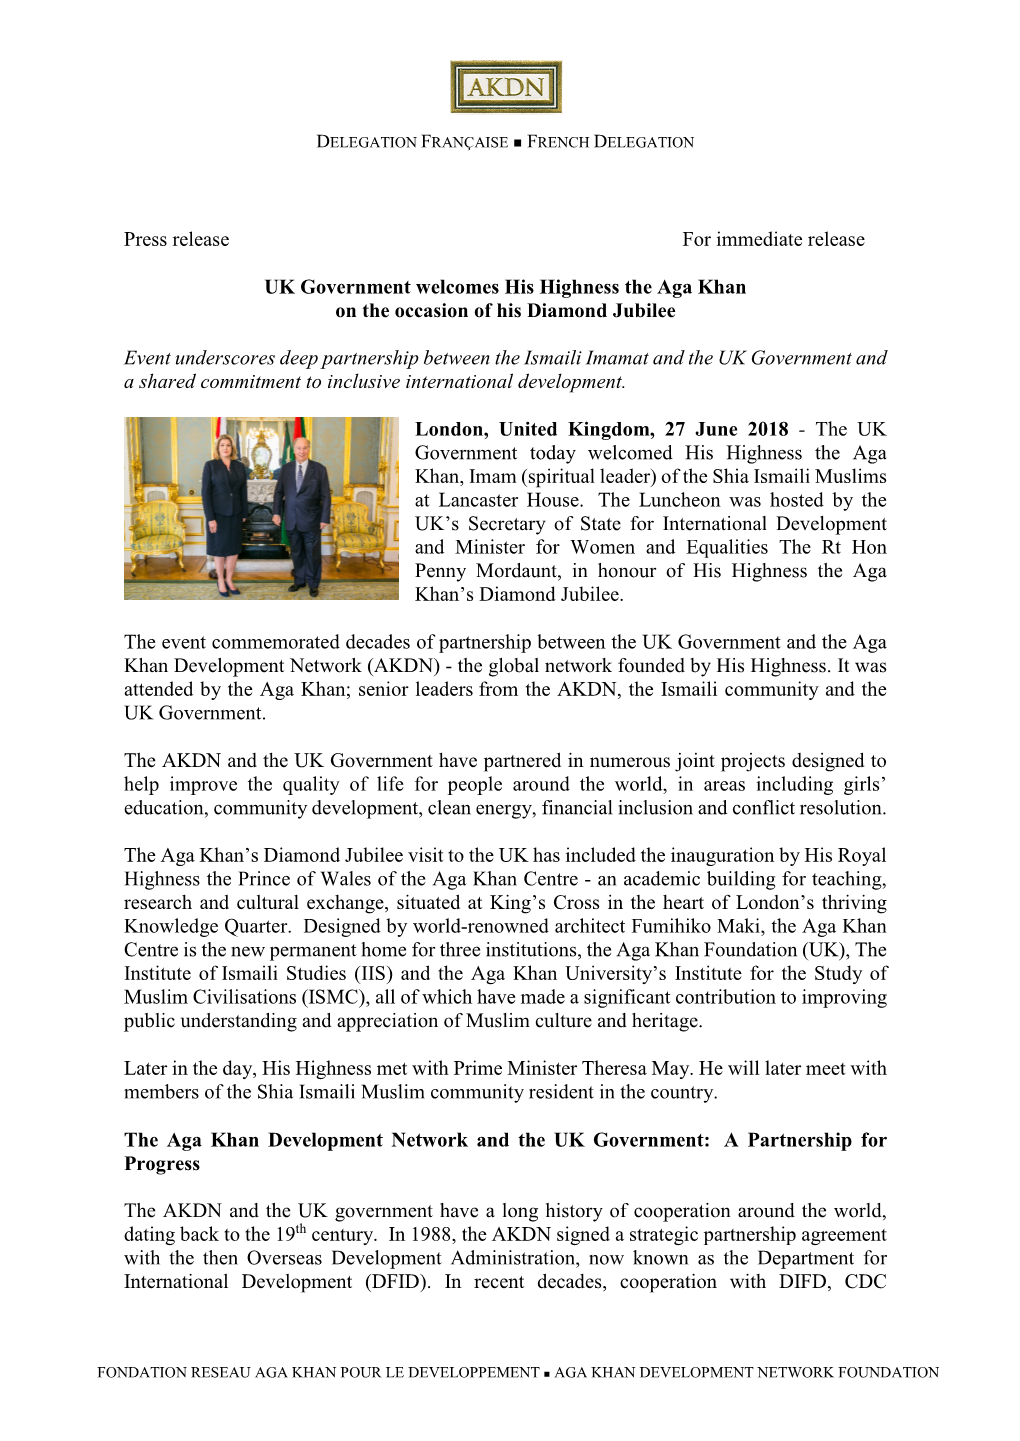 Press Release for Immediate Release UK Government Welcomes His Highness the Aga Khan on the Occasion of His Diamond Jubilee